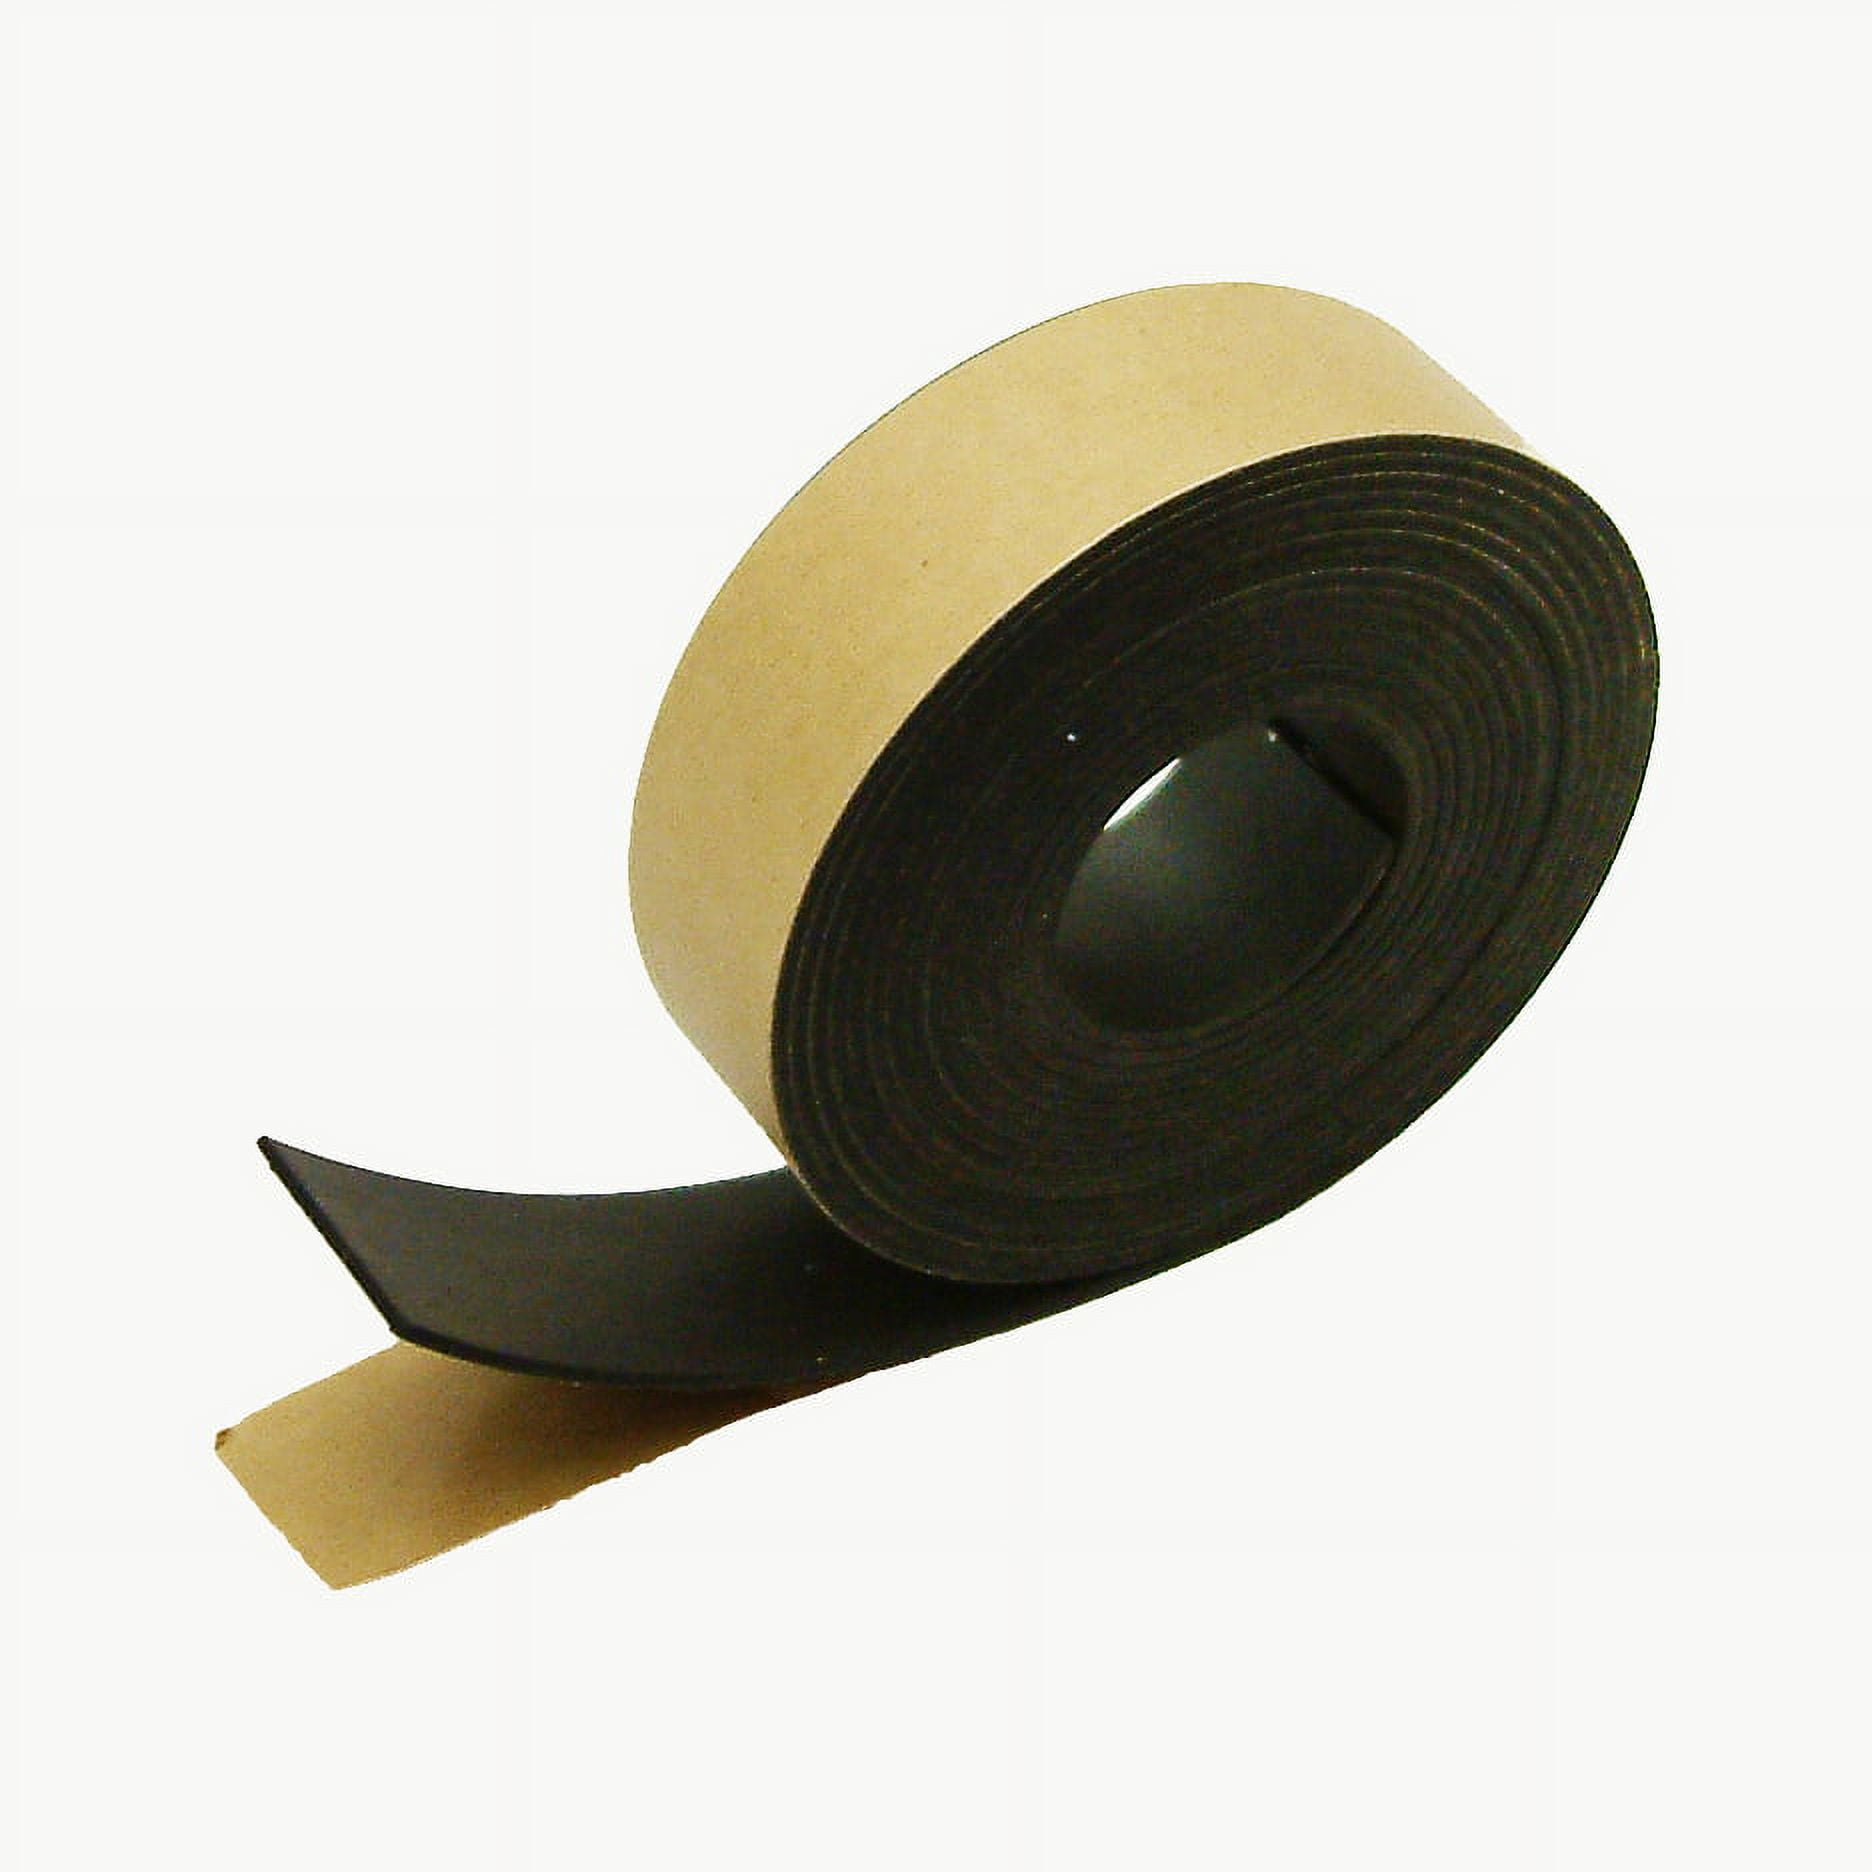 JVCC MAG-02 Magnetic Tape: 1/2 in x 10 ft. (Black) 